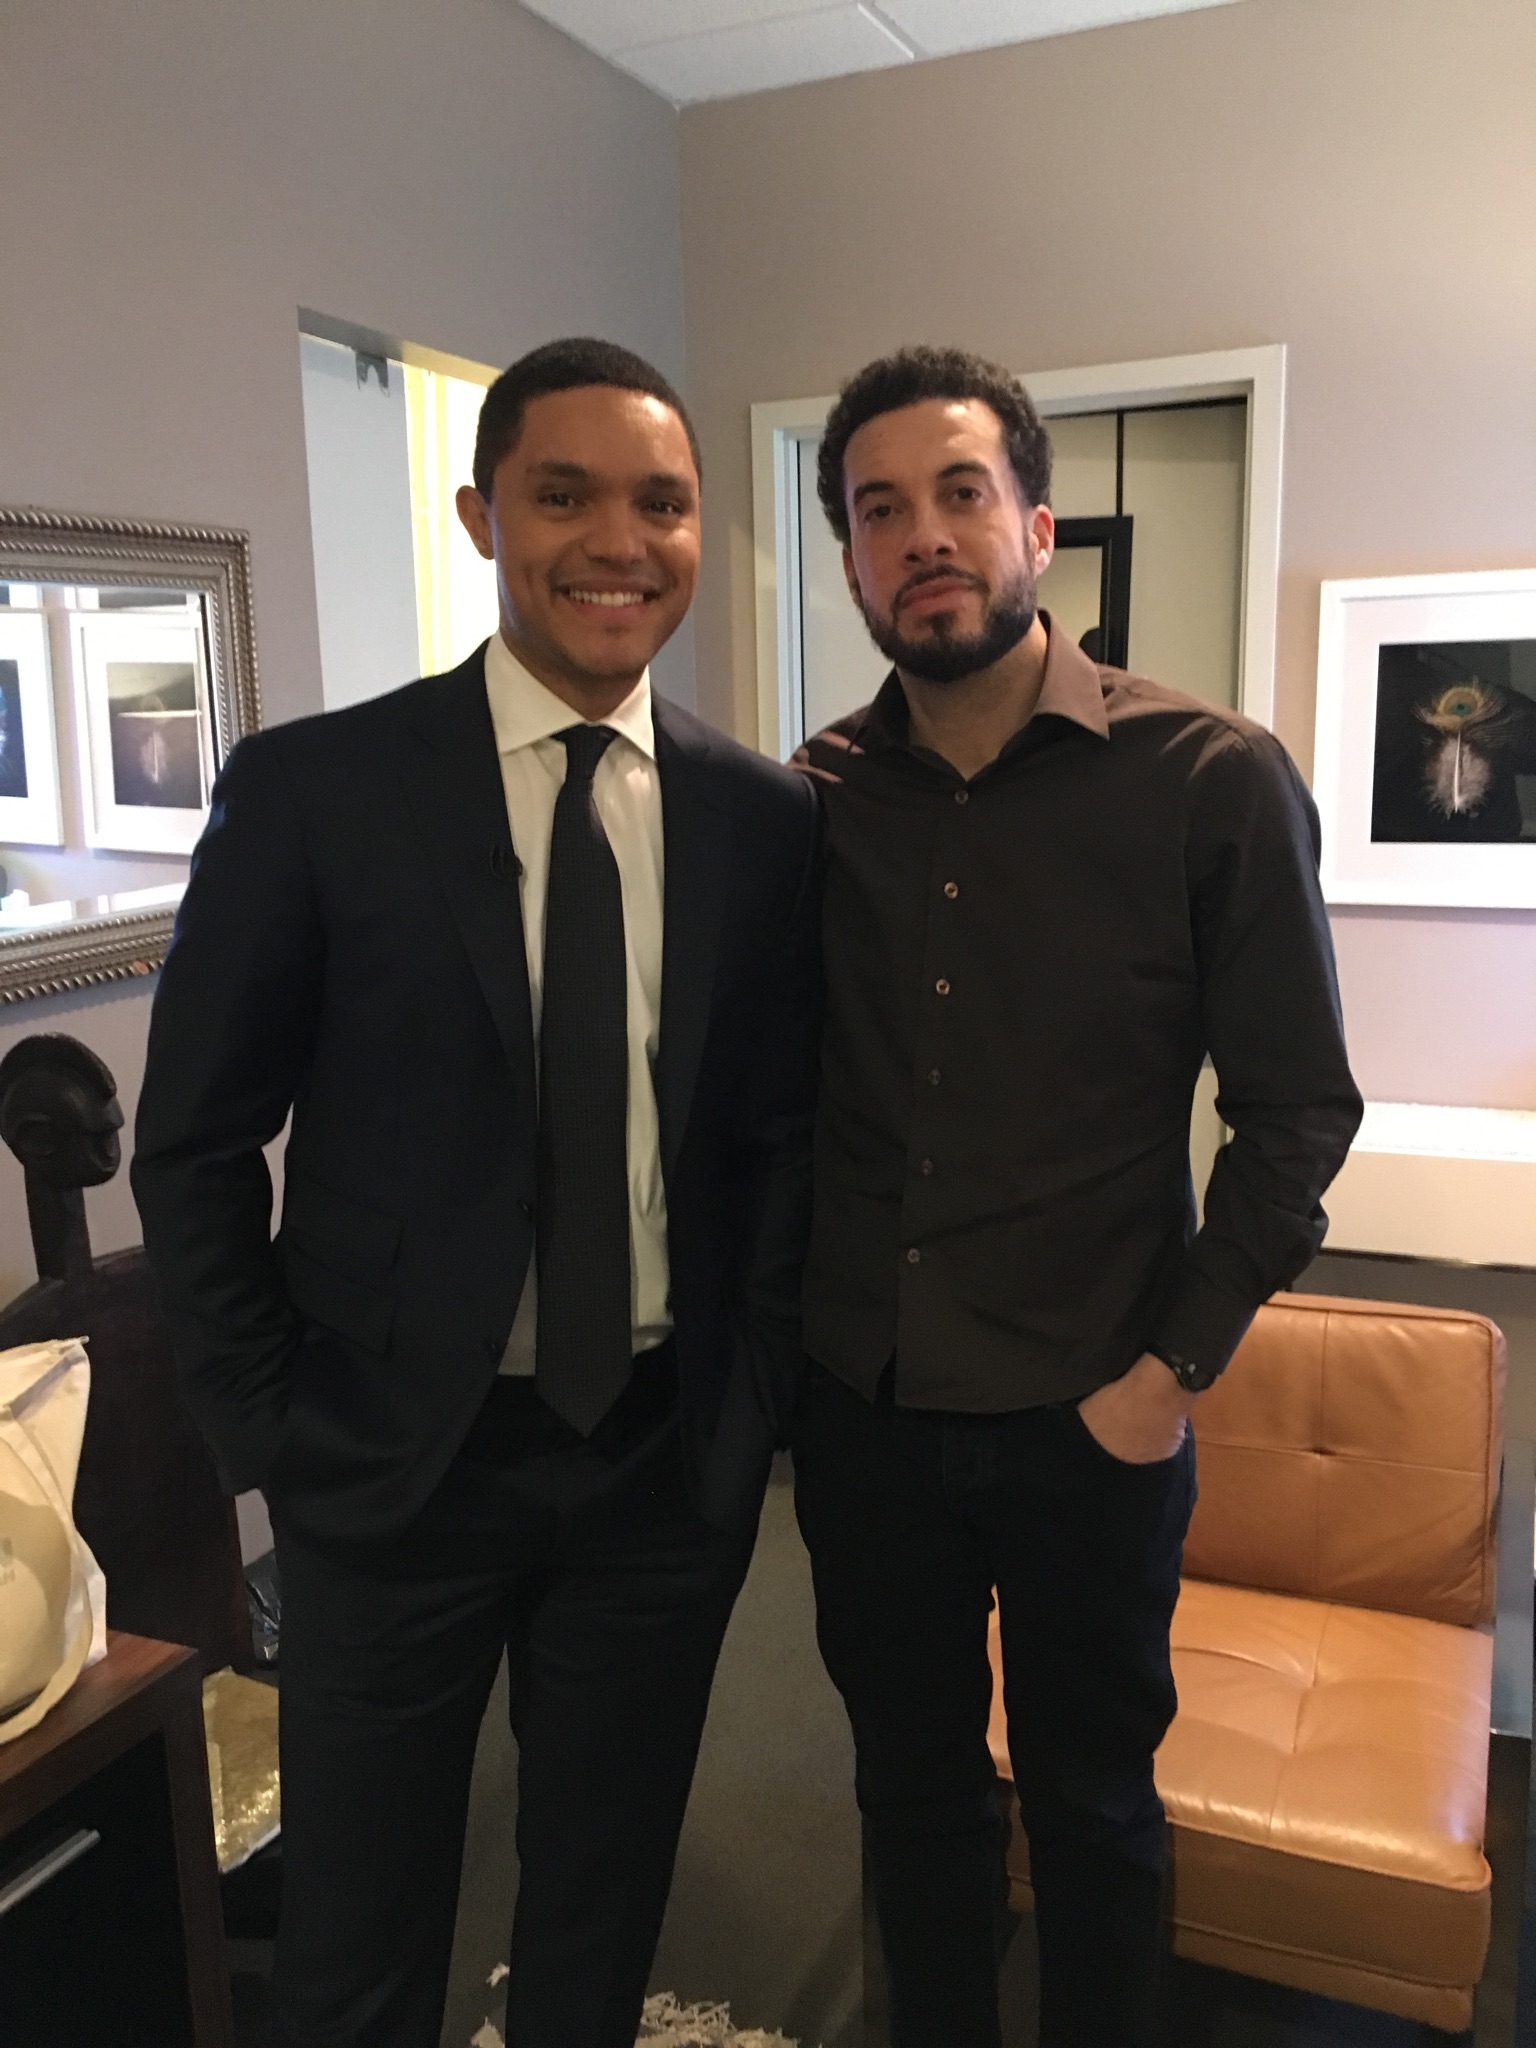  Ezra Edelman and Trevor Noah in the green room at “The Daily Show” before the taping. (Libby Geist/ESPN Films)